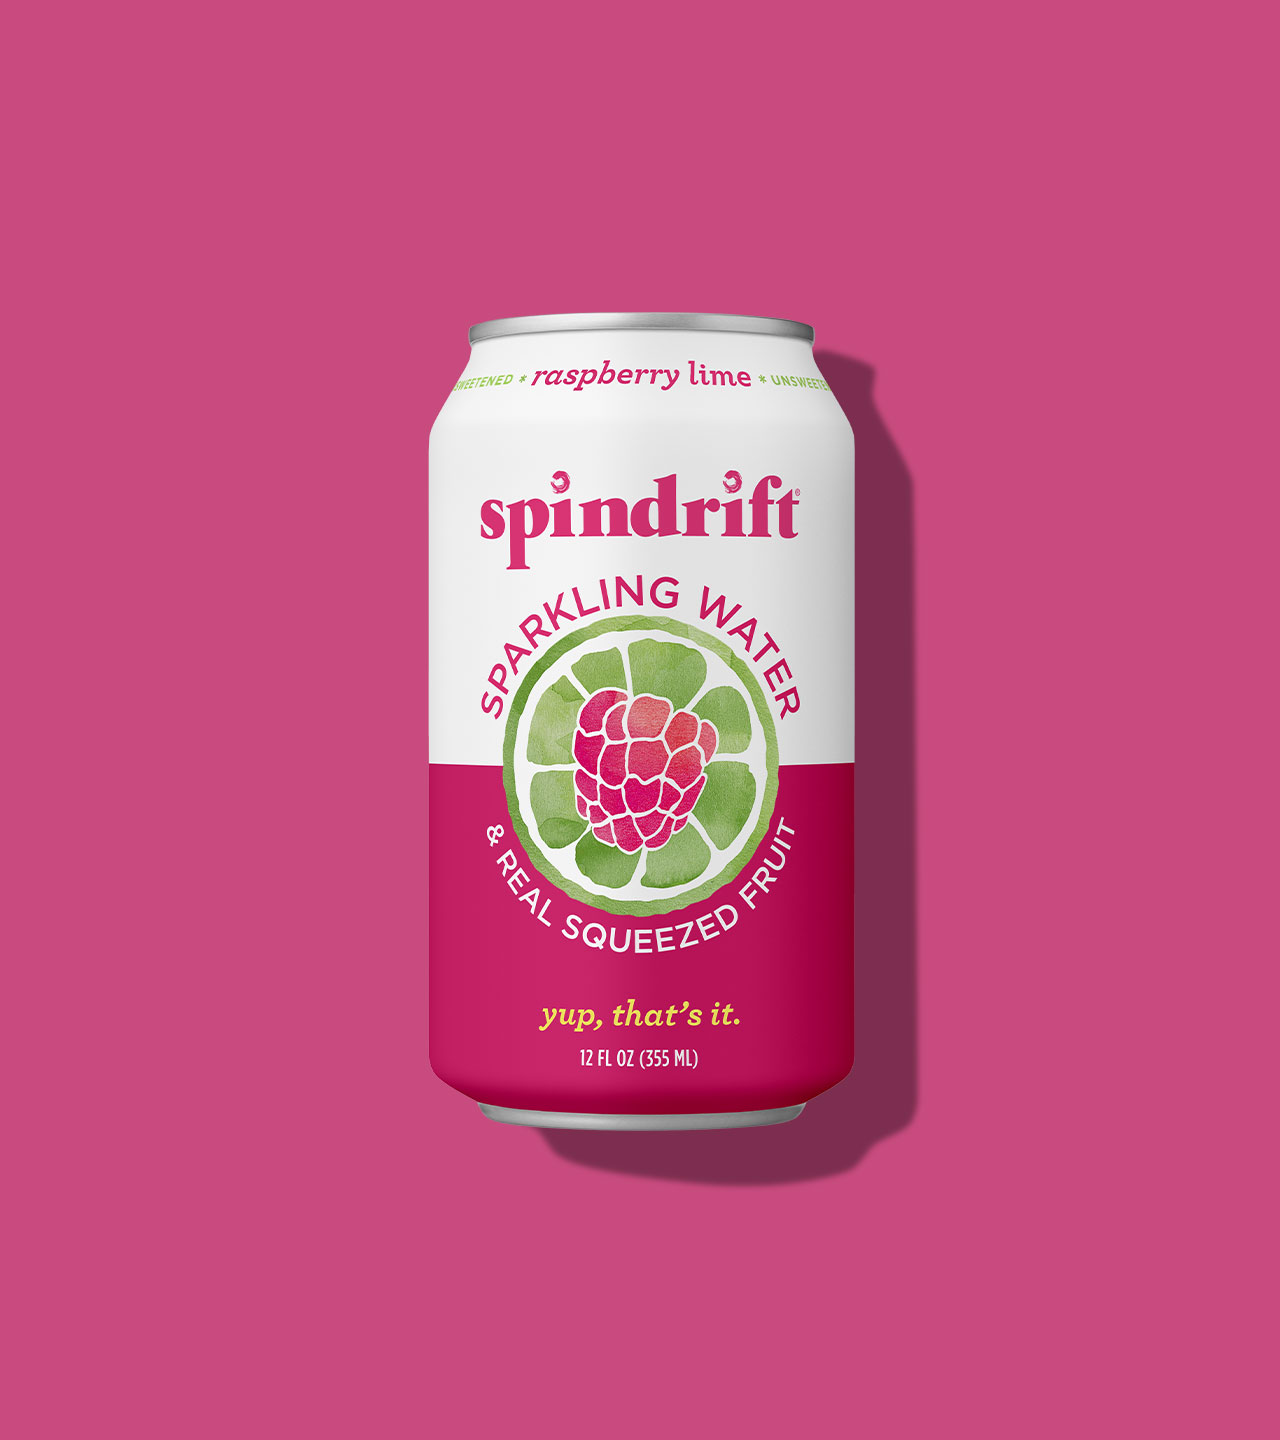 Spindrift Raspberry Lime Packaging, Branding and Design by Colony